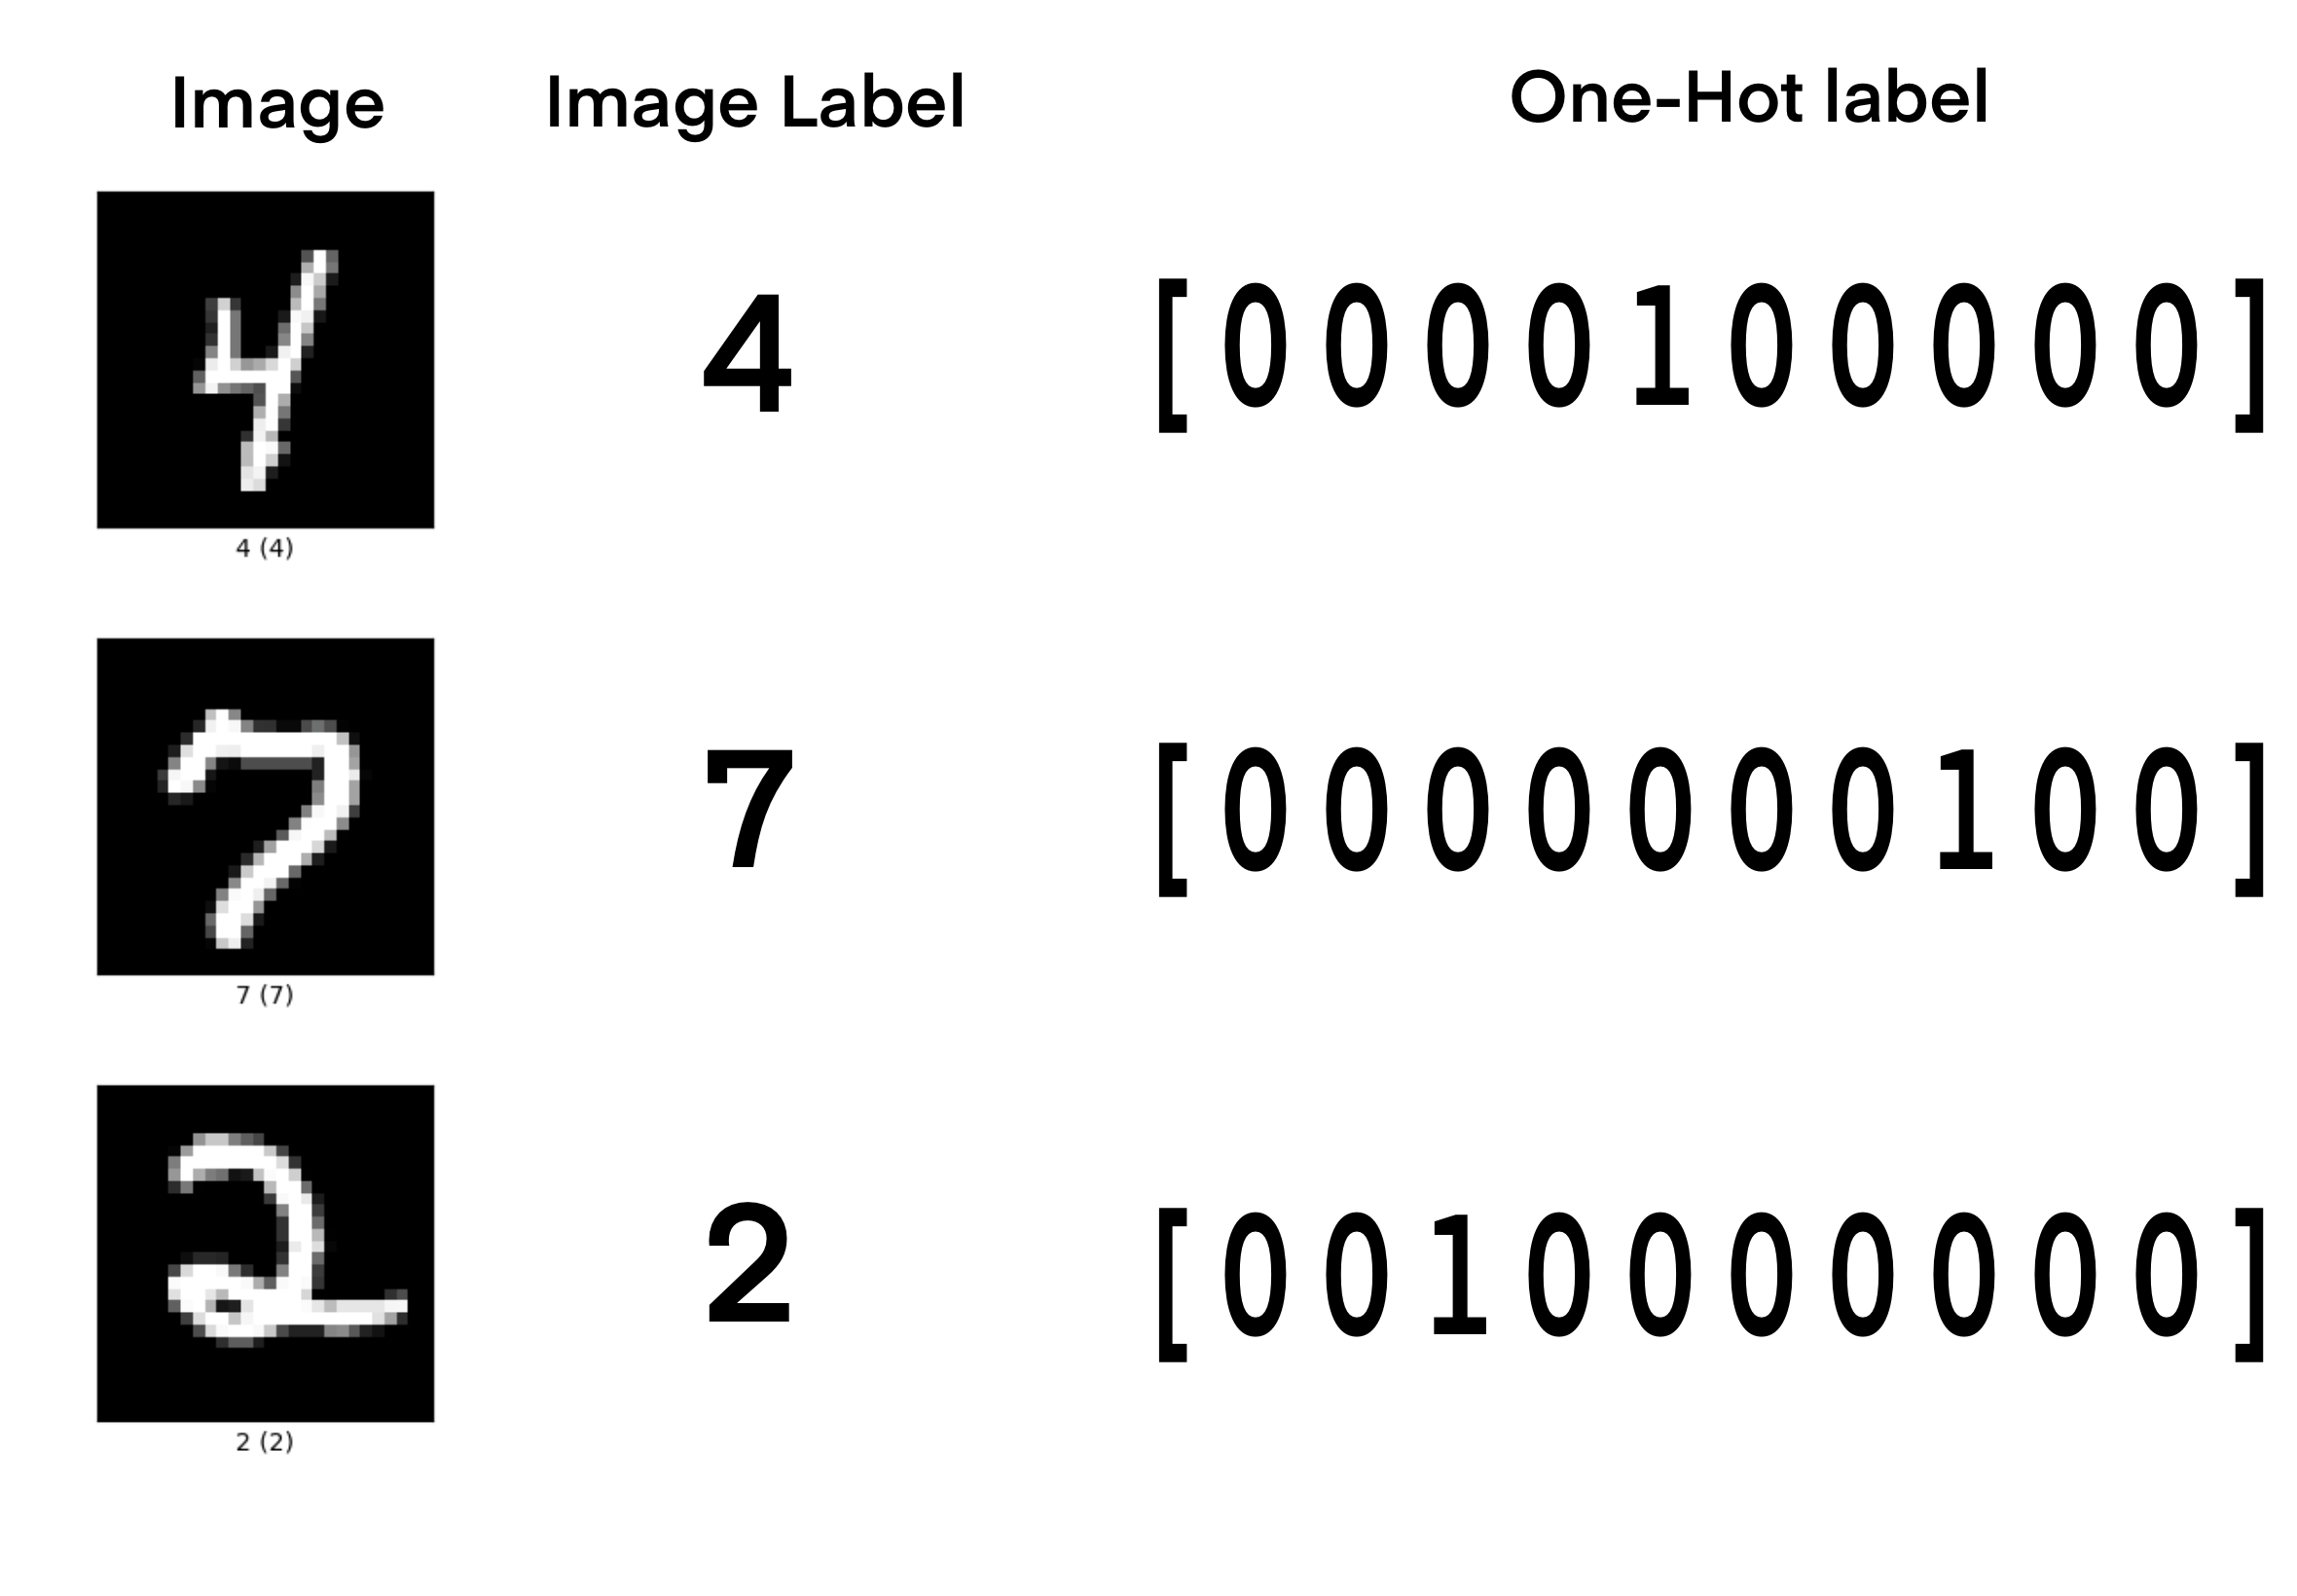 Image made by me to illustrate how the mnist digits 4, 7, and 2 have their labels converted from simple labels to one-hot encoded labels, increasing the model's numerical stability.